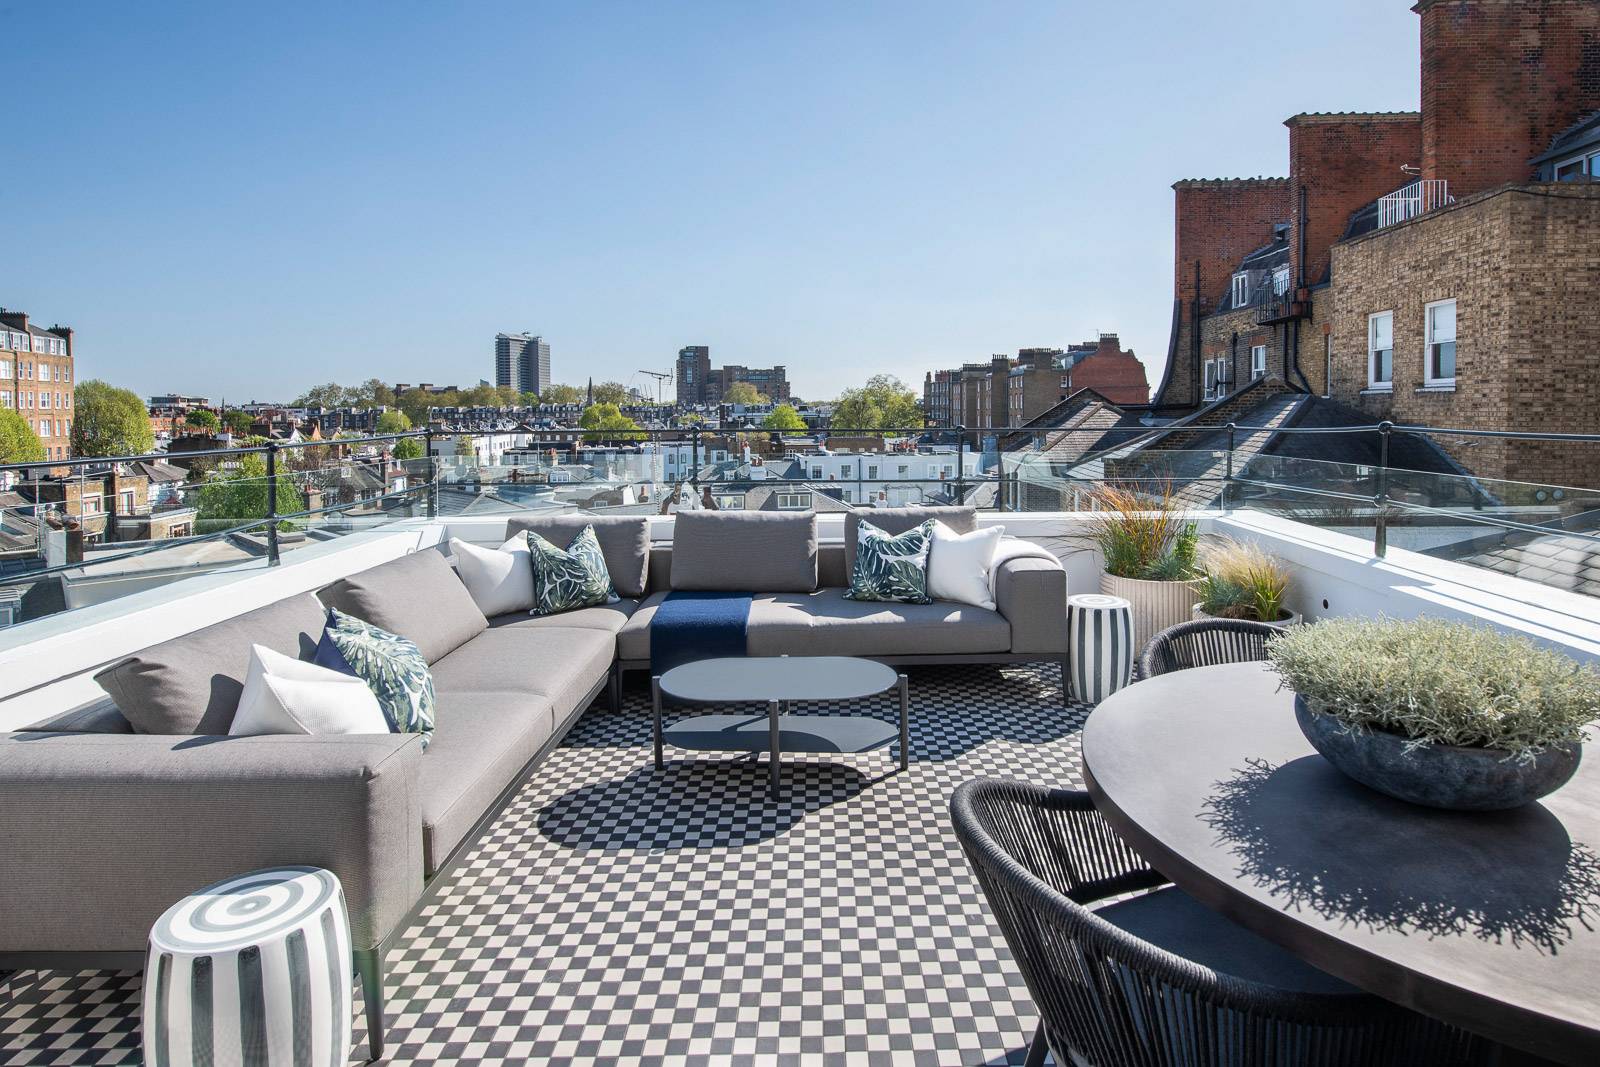 Stunning two-bedroom apartment with a large private terrace with spectacular views over Kensington.